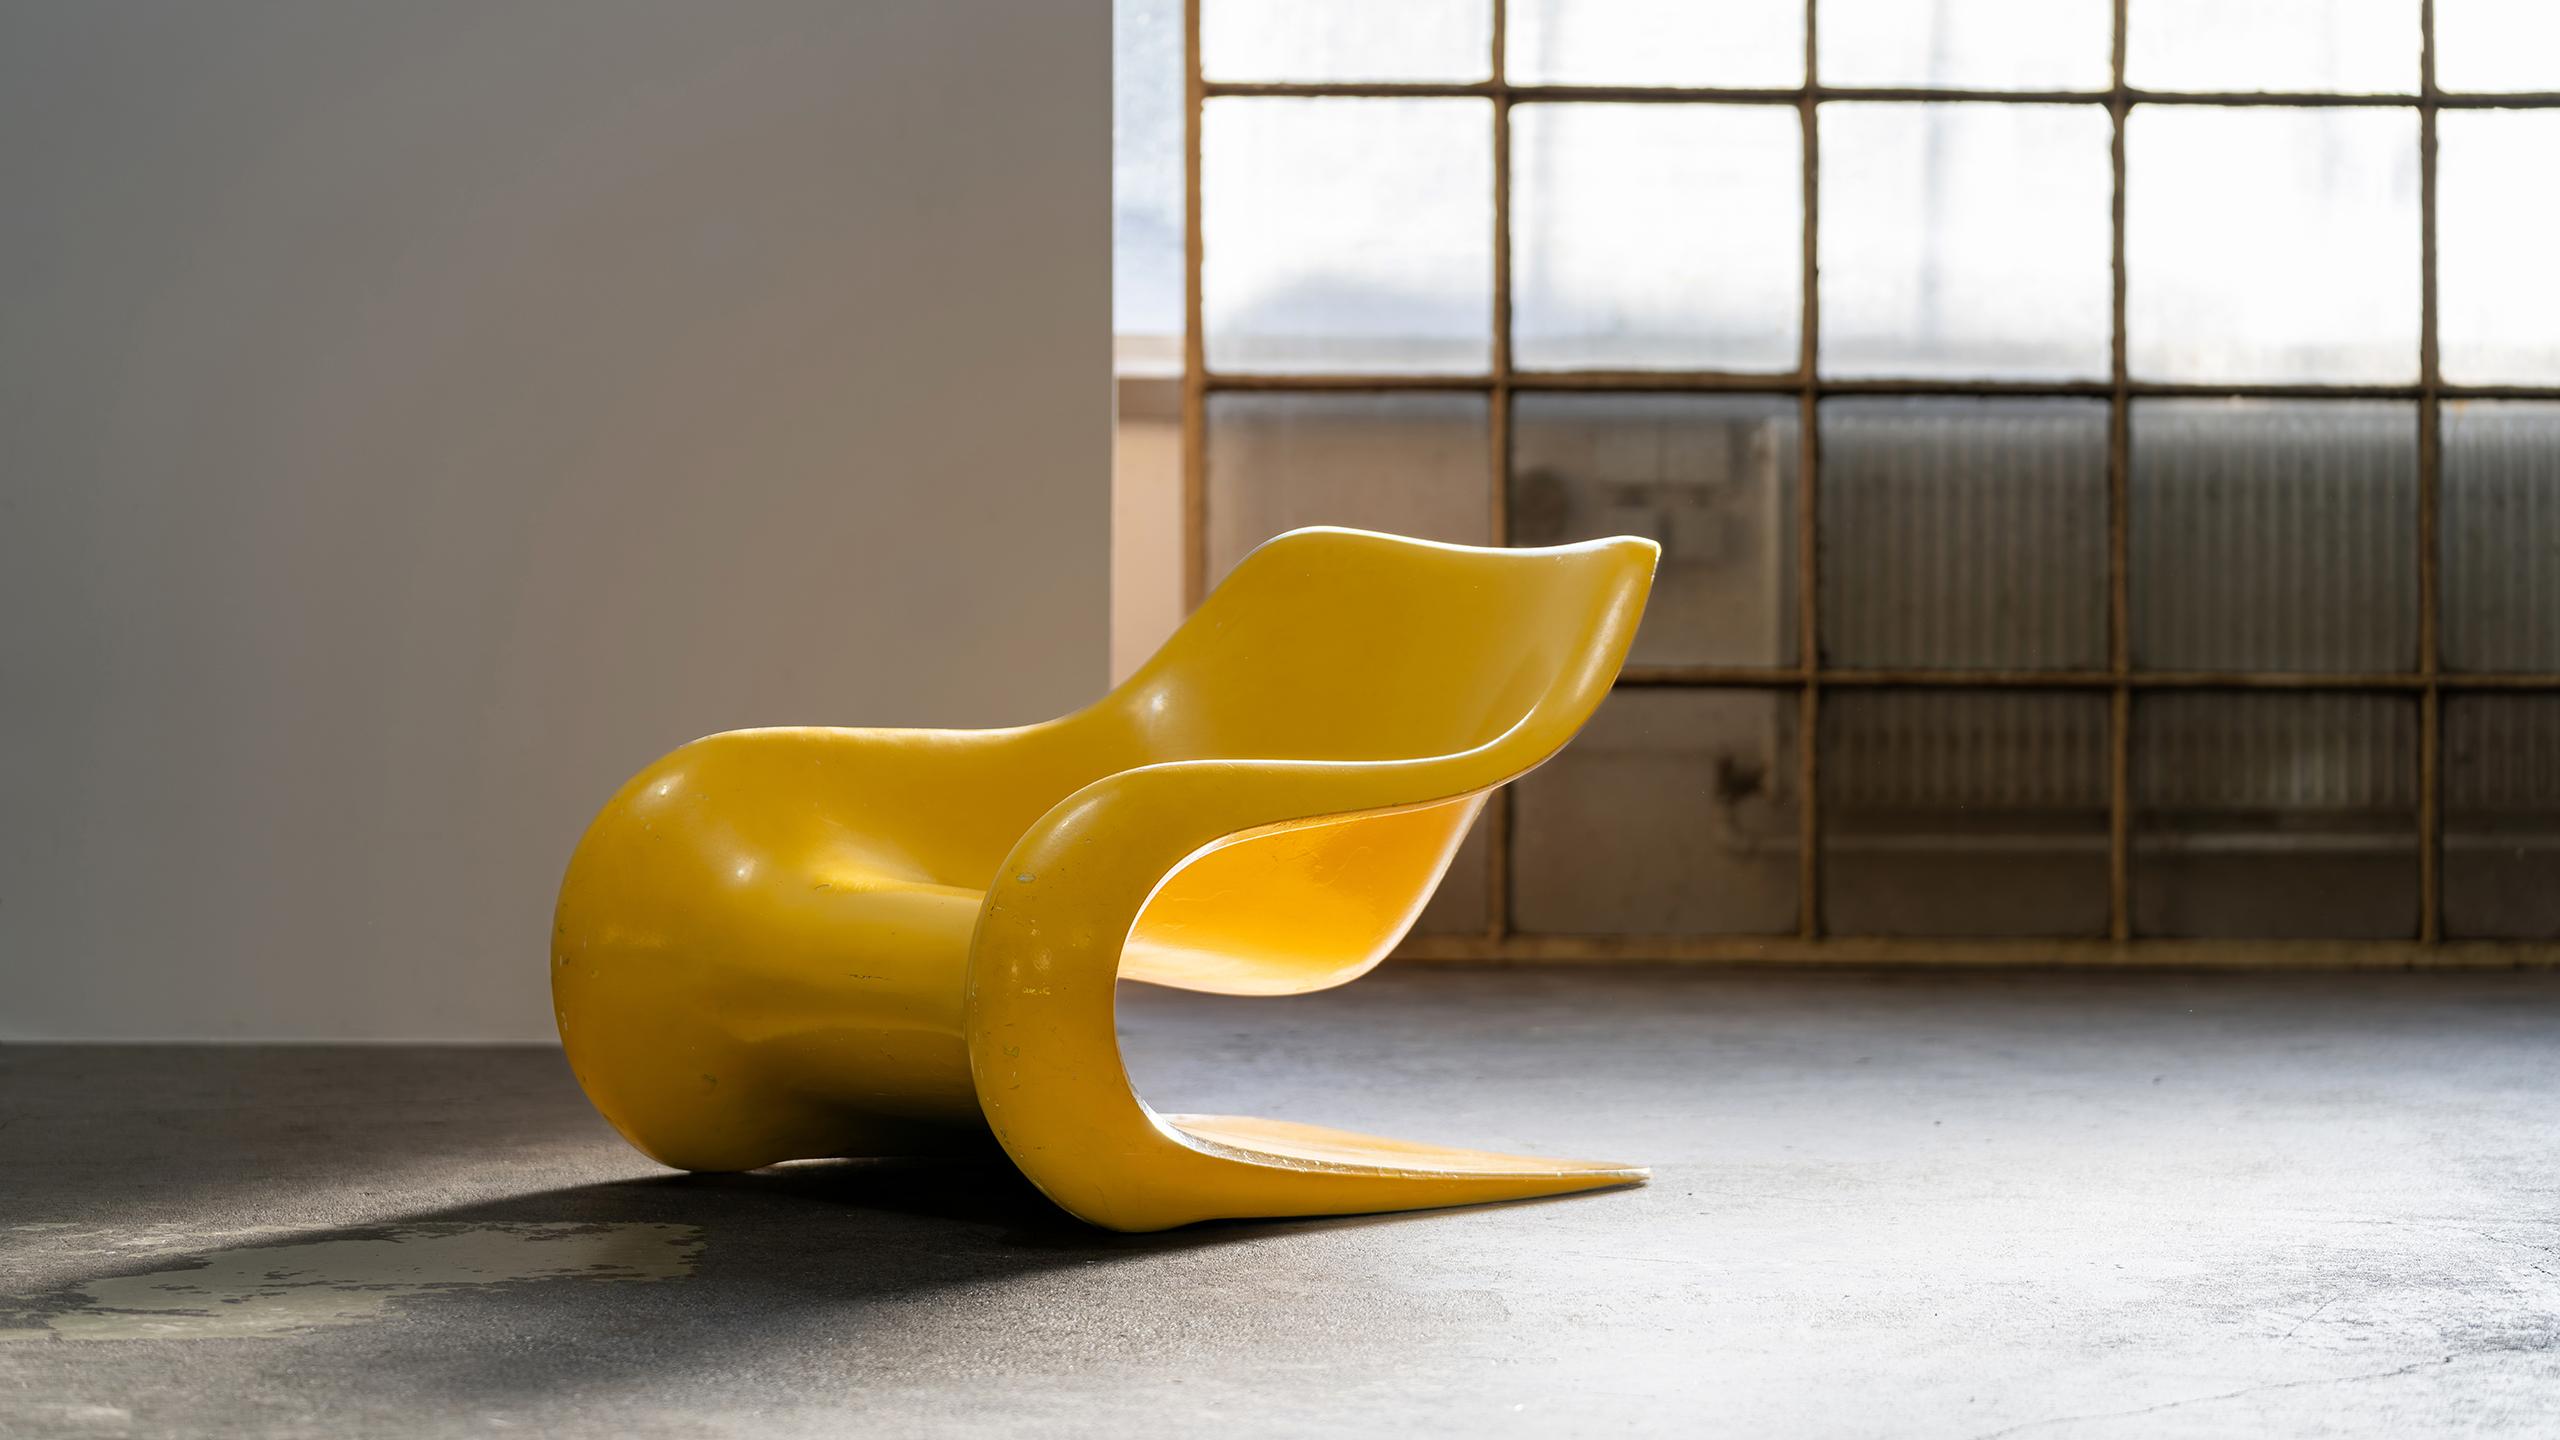 Targa Chair by Klaus Uredat, 19709 for Horn Collection, Germany - Organic Design 10